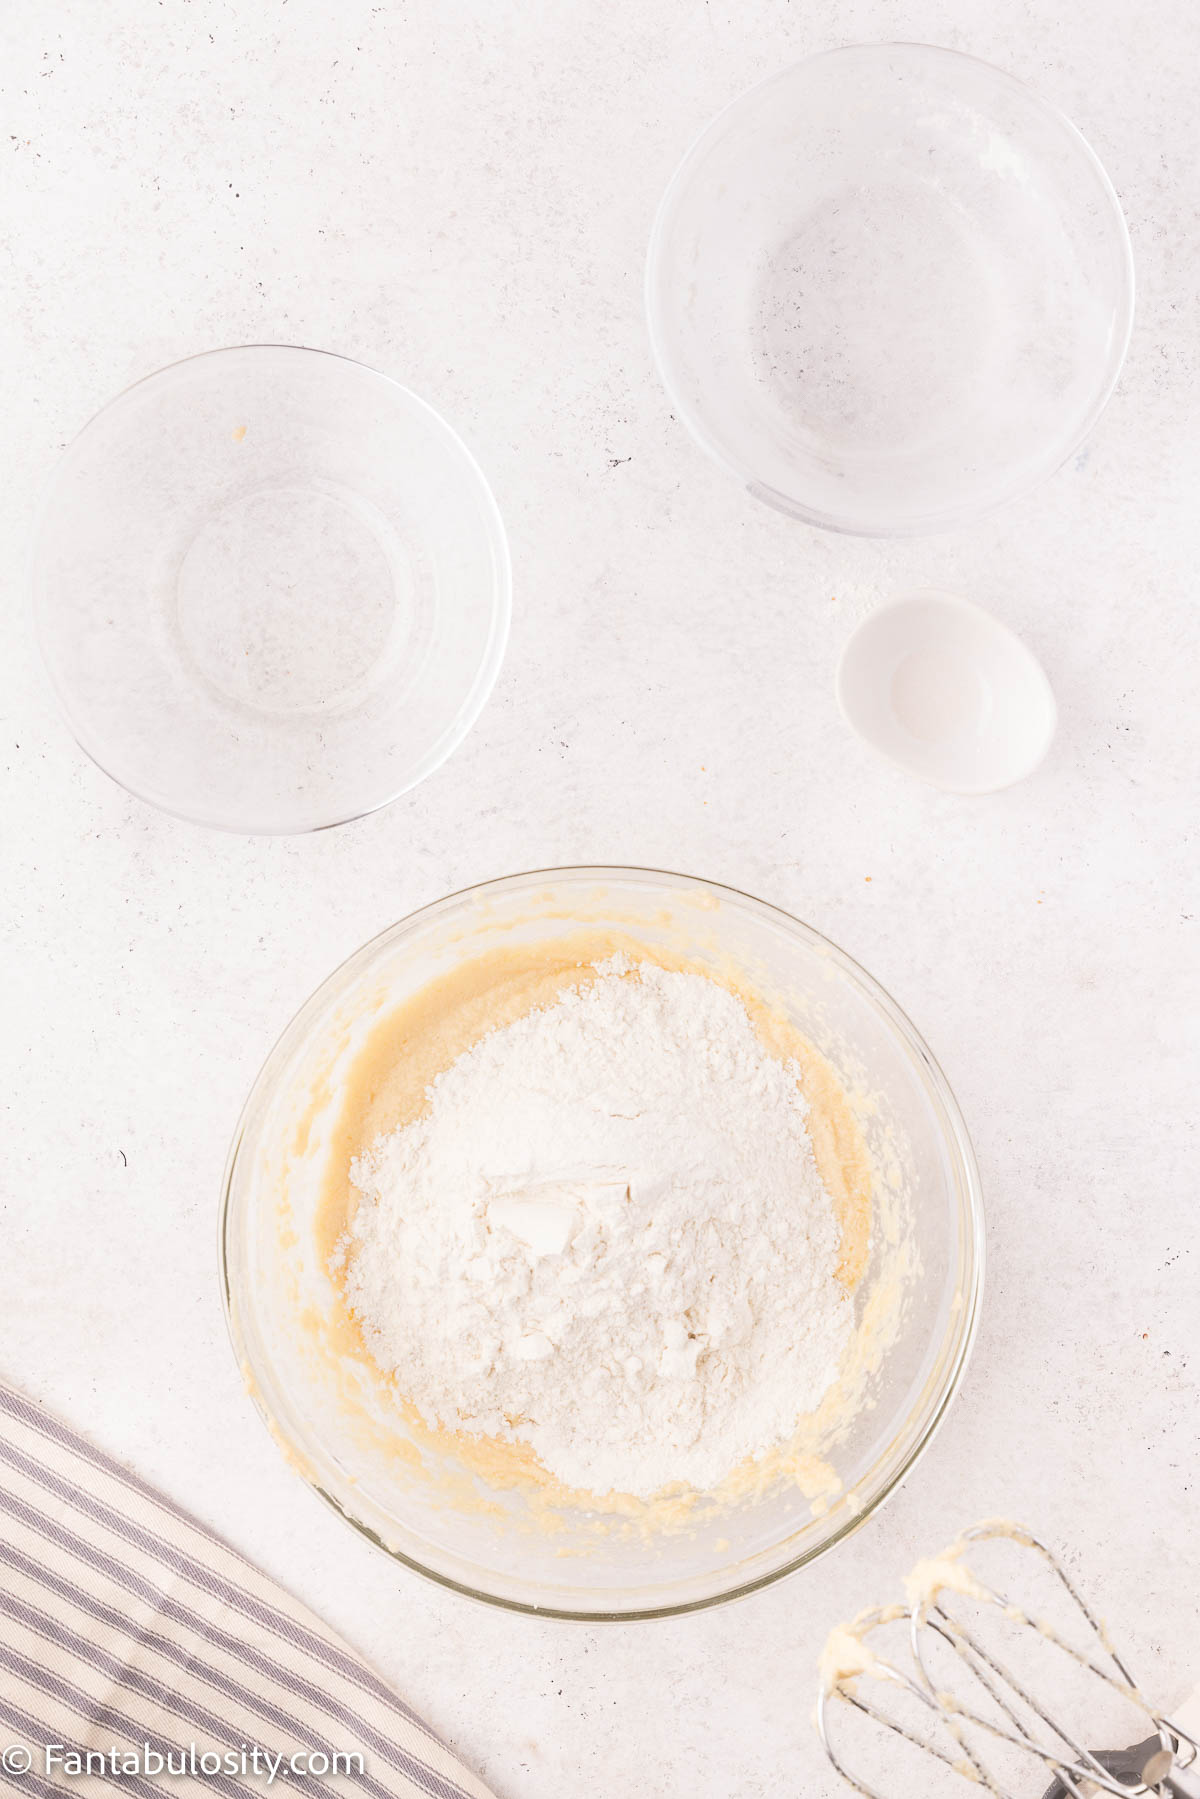 Flour and baking soda have been added to a mixing bowl with cupcake batter in it